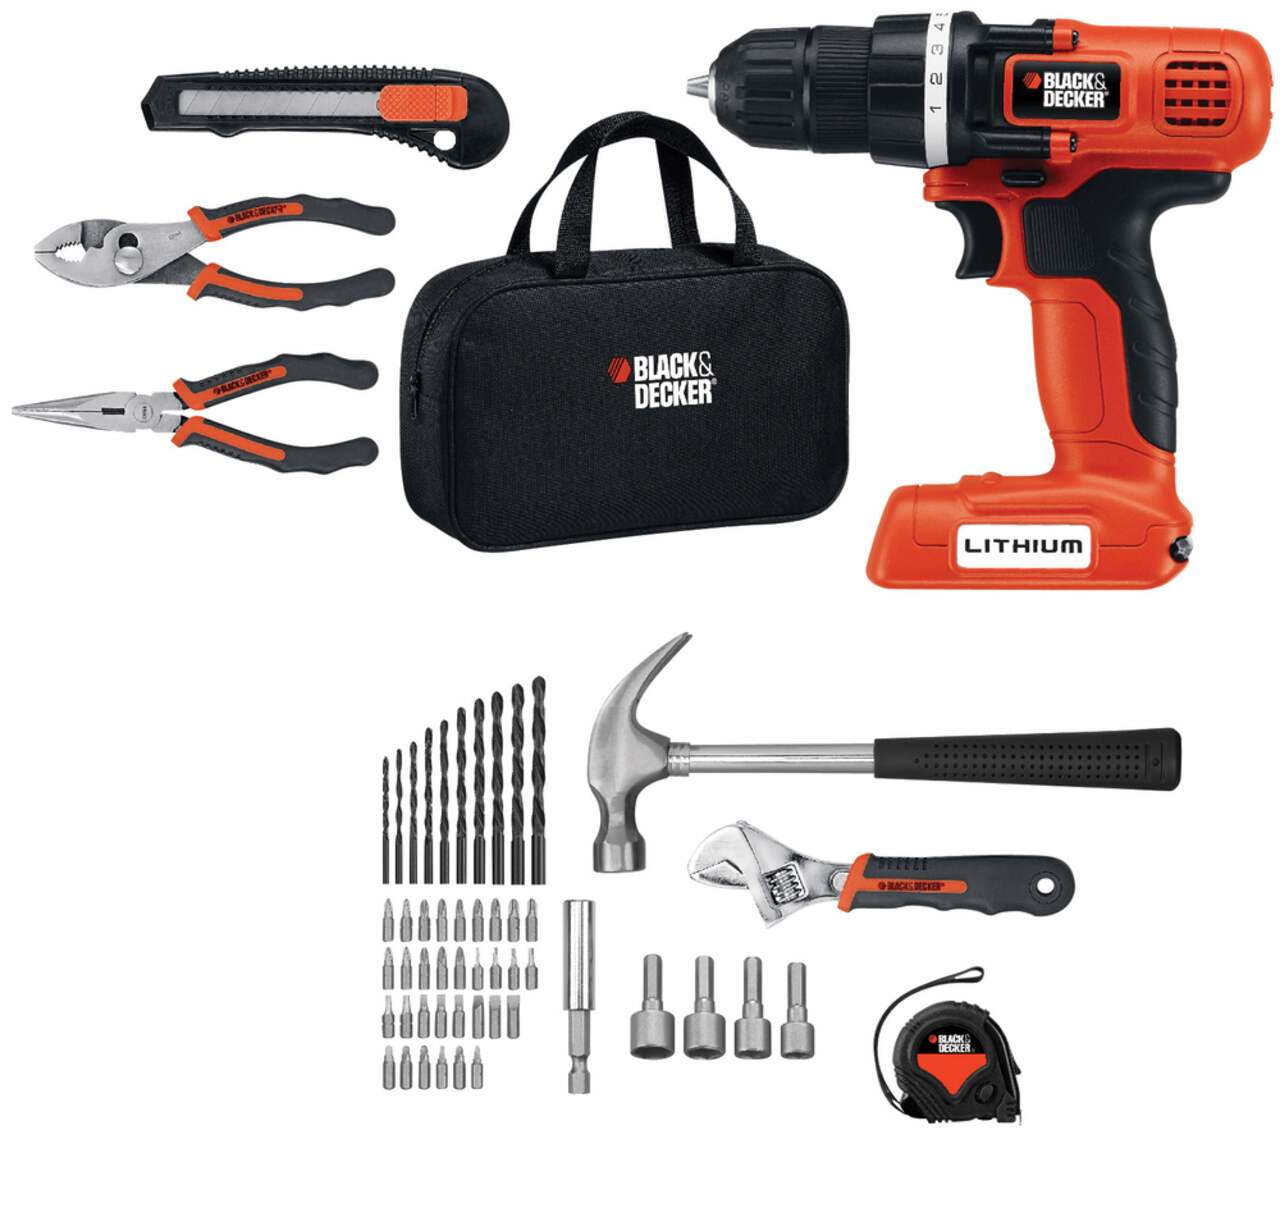 Black and Decker LDX172PK - 7.2V Lithium Cordless Drill Project